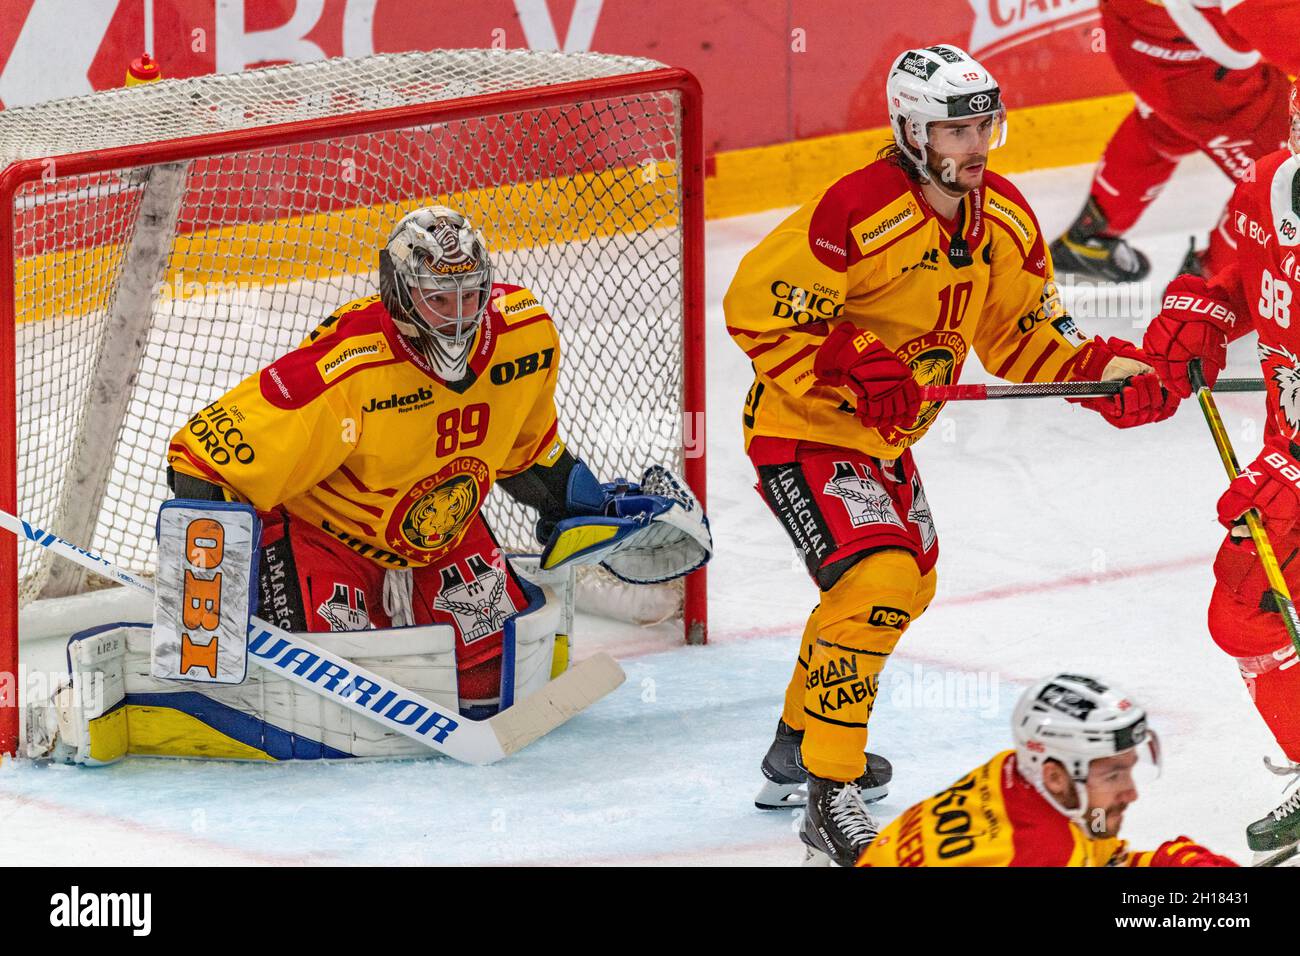 Lausanne Switzerland, 10/16/2021: Robert Mayer (goalkkeper) of SCL Tigers  is in action during the 16th match of the 2021-2022 Swiss National League  Season with the Lausanne Hc and SCL Tigers (Photo by